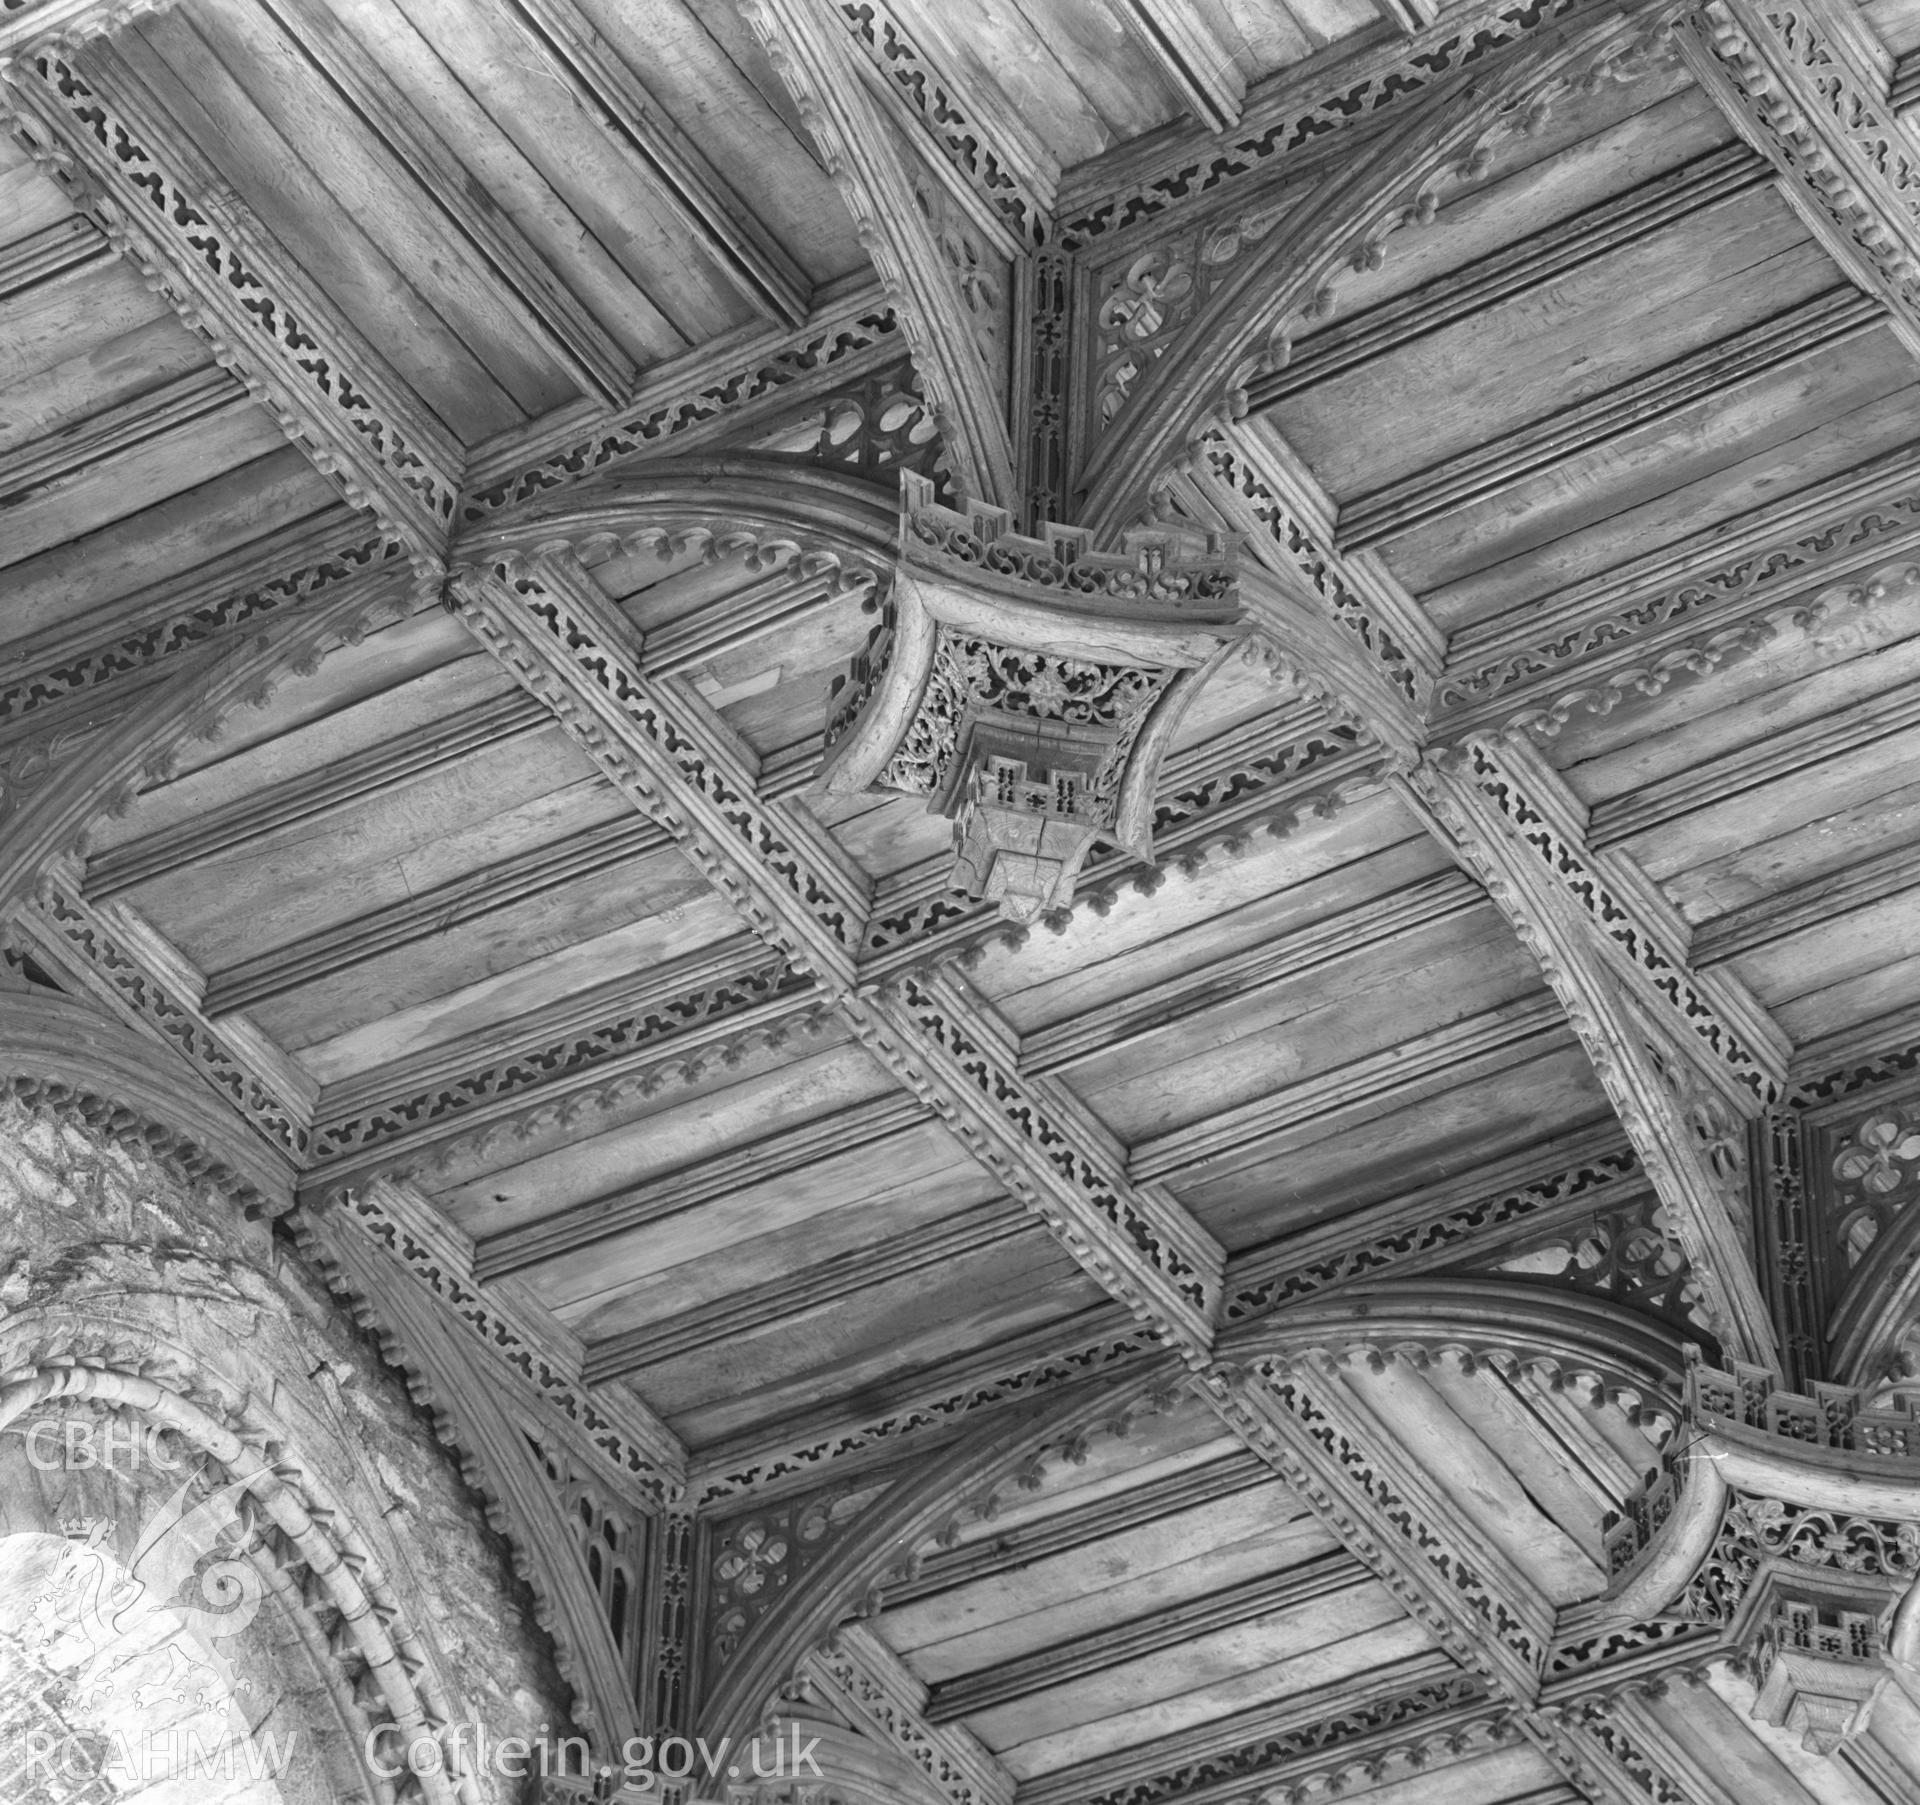 Digital copy of a black and white acetate negative showing detail view of pendant ceiling in St. David's Cathedral, taken by E.W. Lovegrove, July 1936.